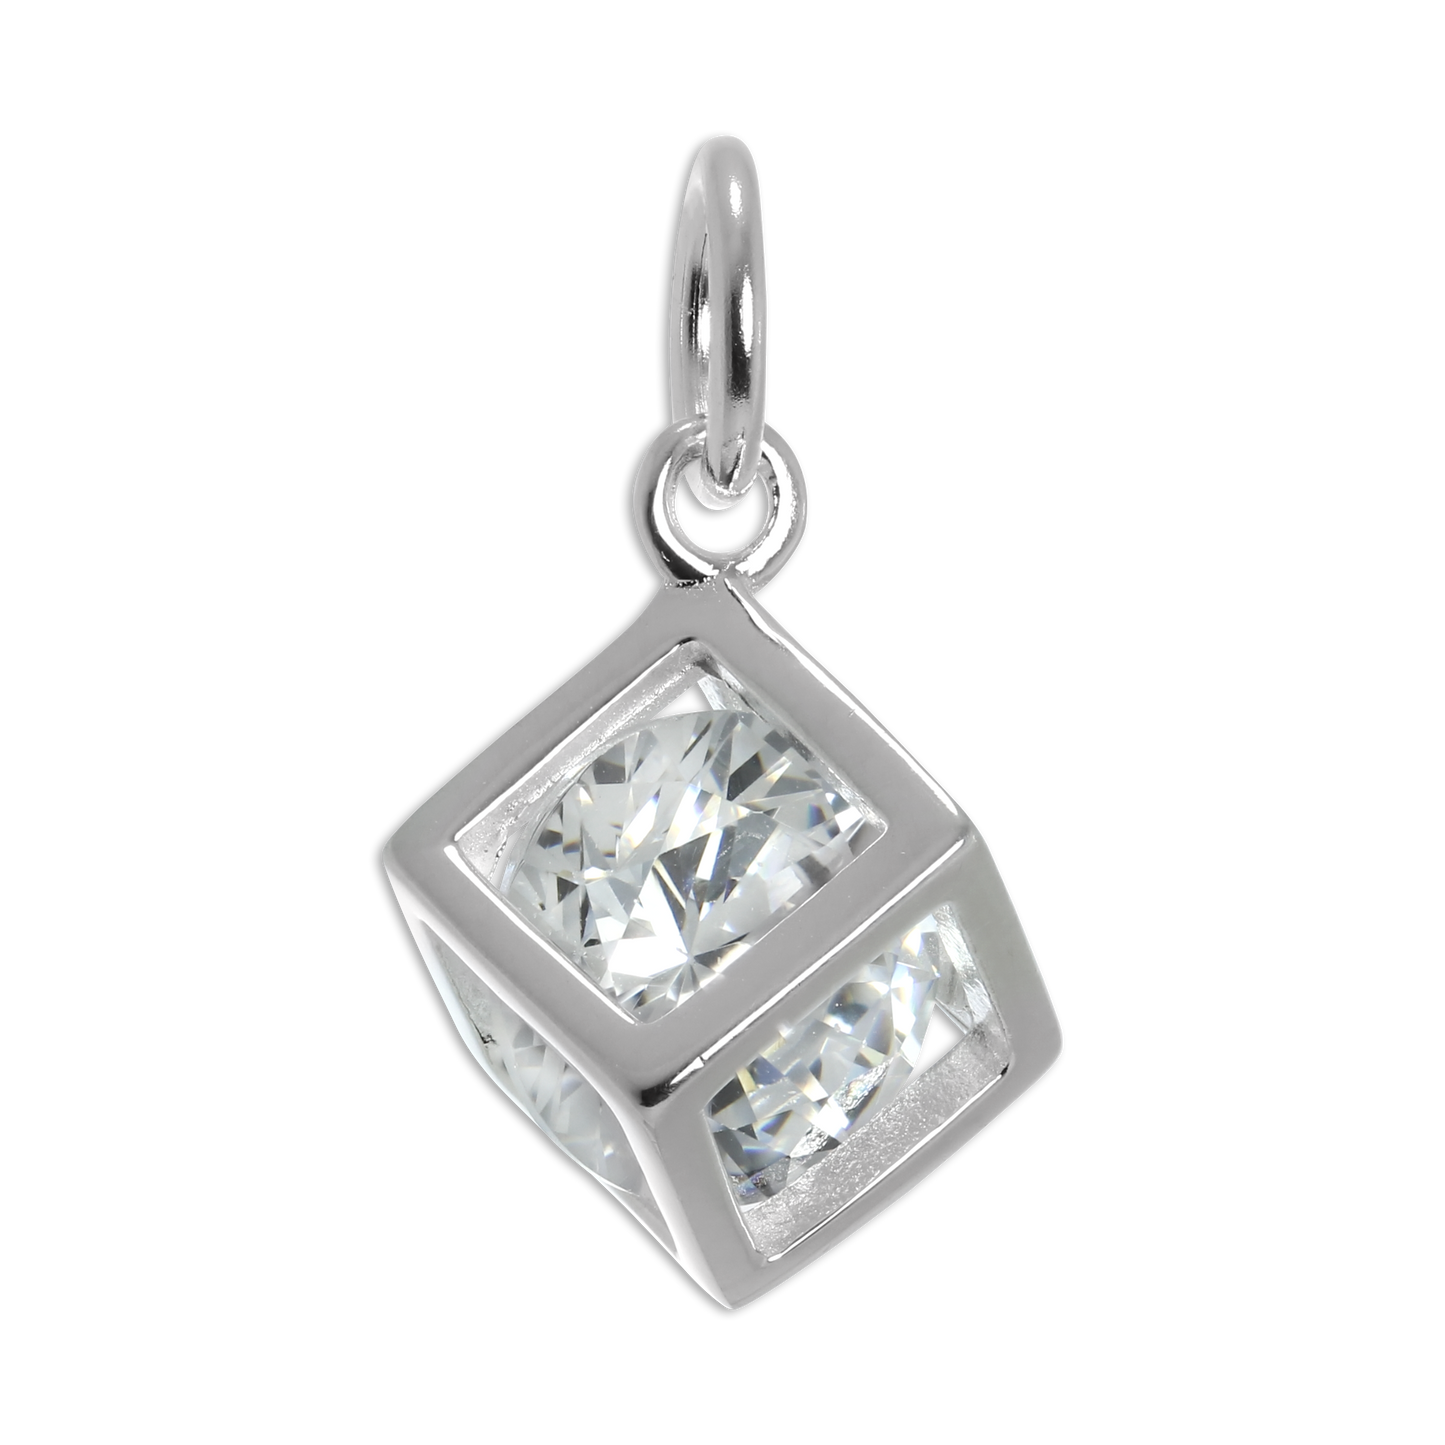 Sterling Silver Open Cube Charm with CZ Crystal